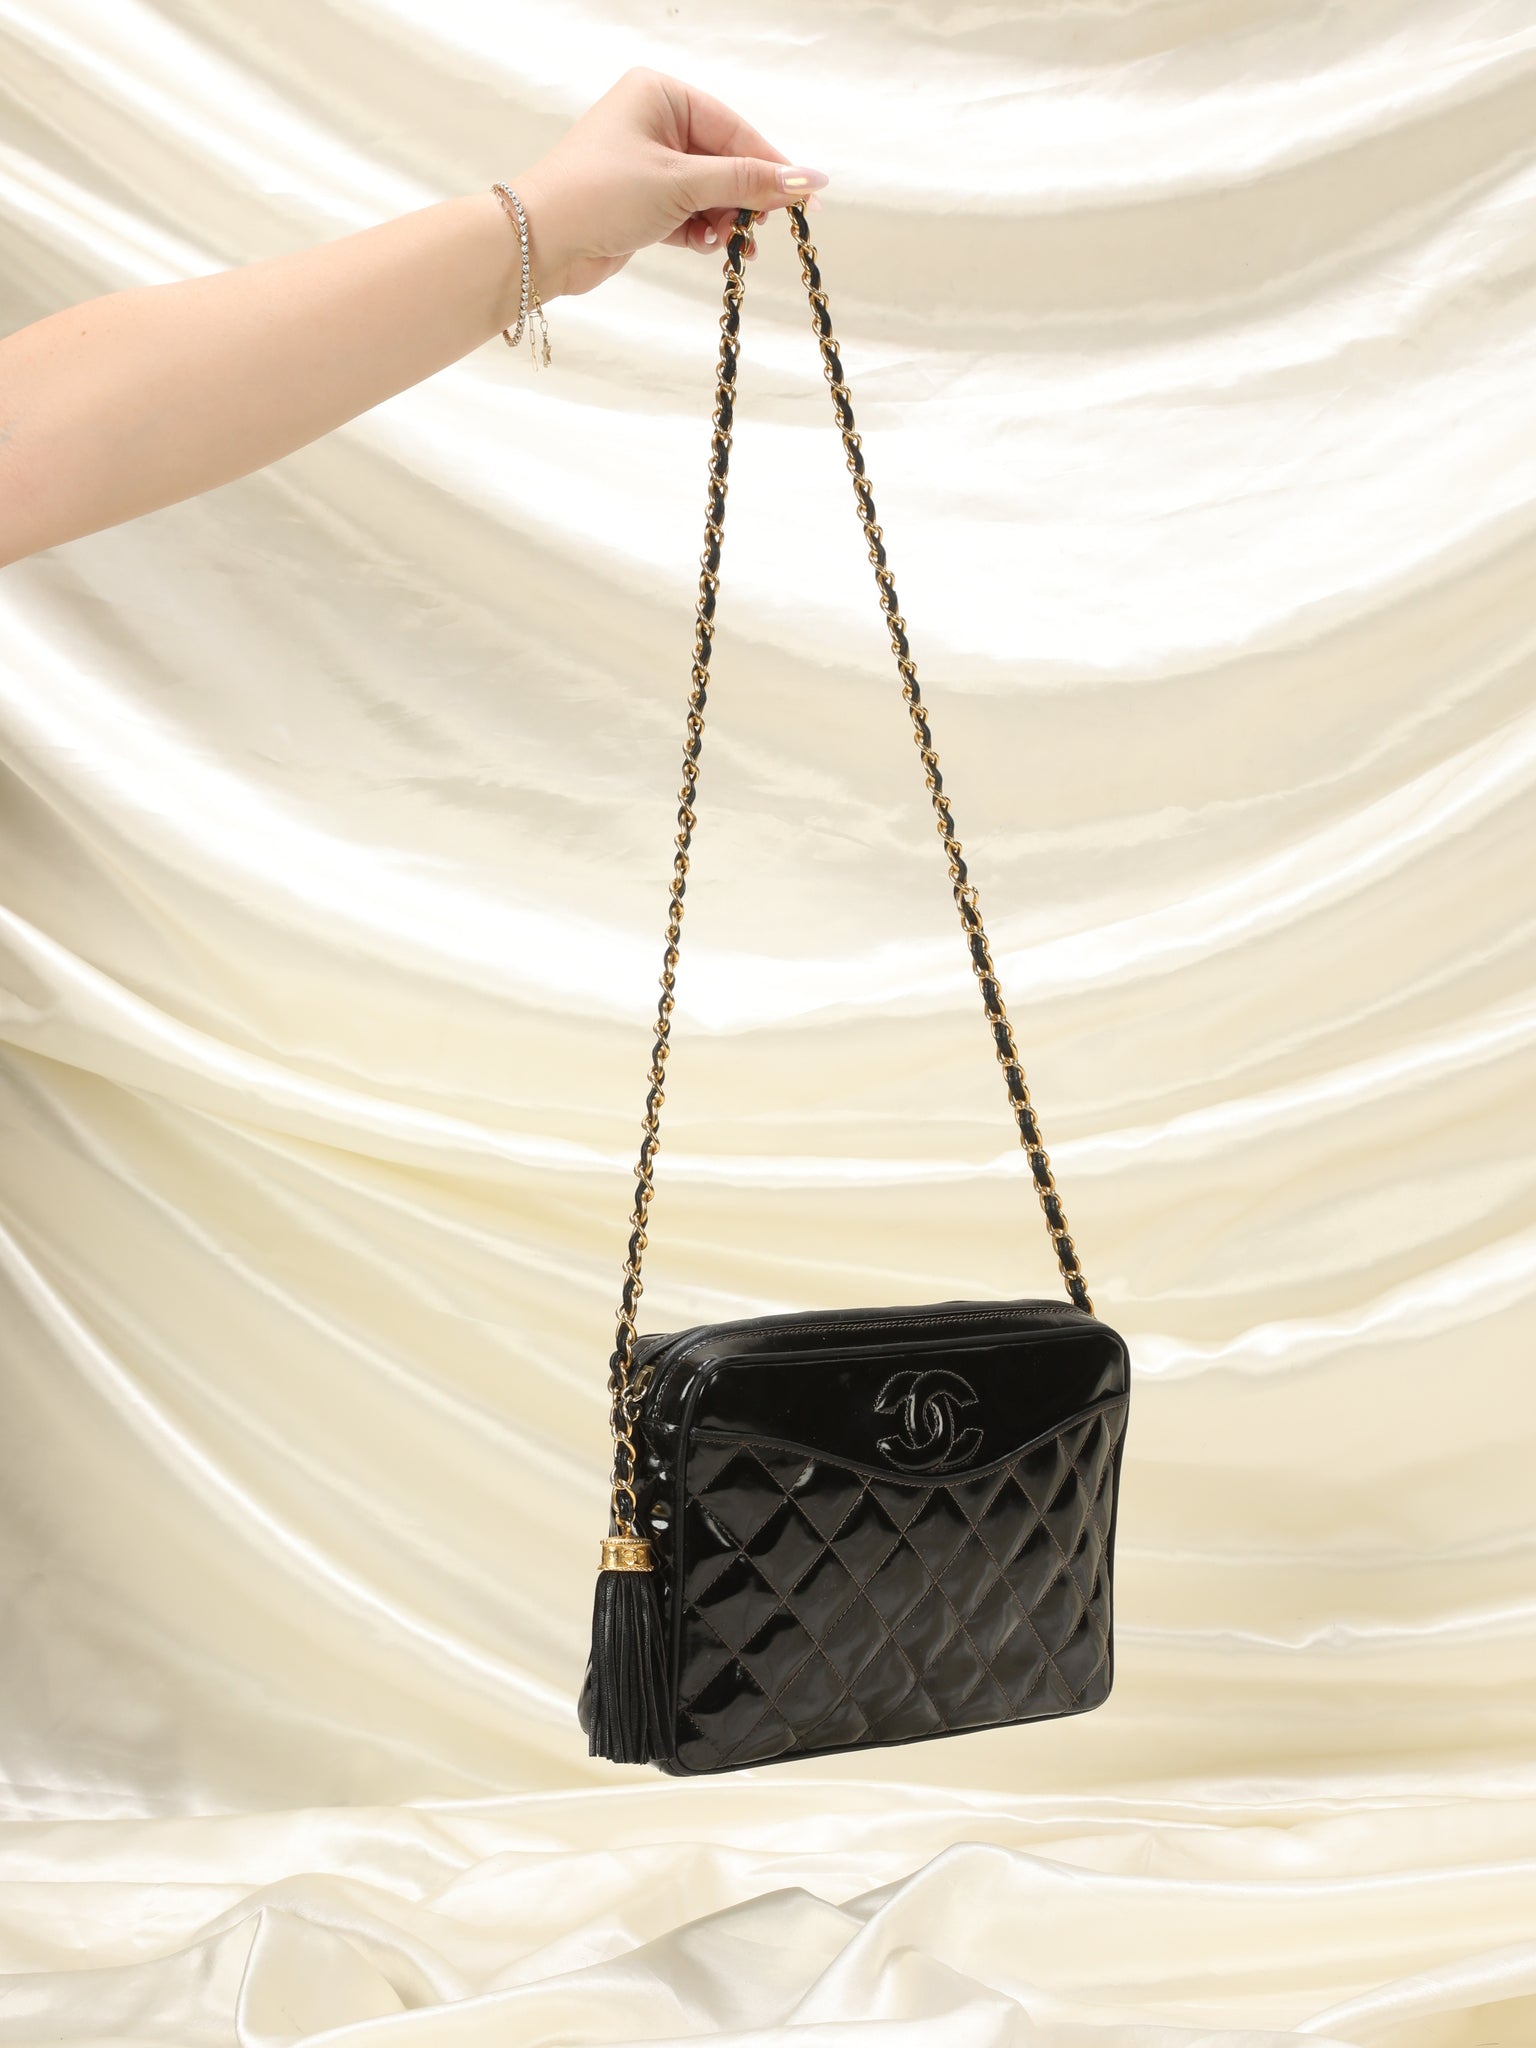 Extremely Rare Chanel Patent All Black Flap Bag – SFN